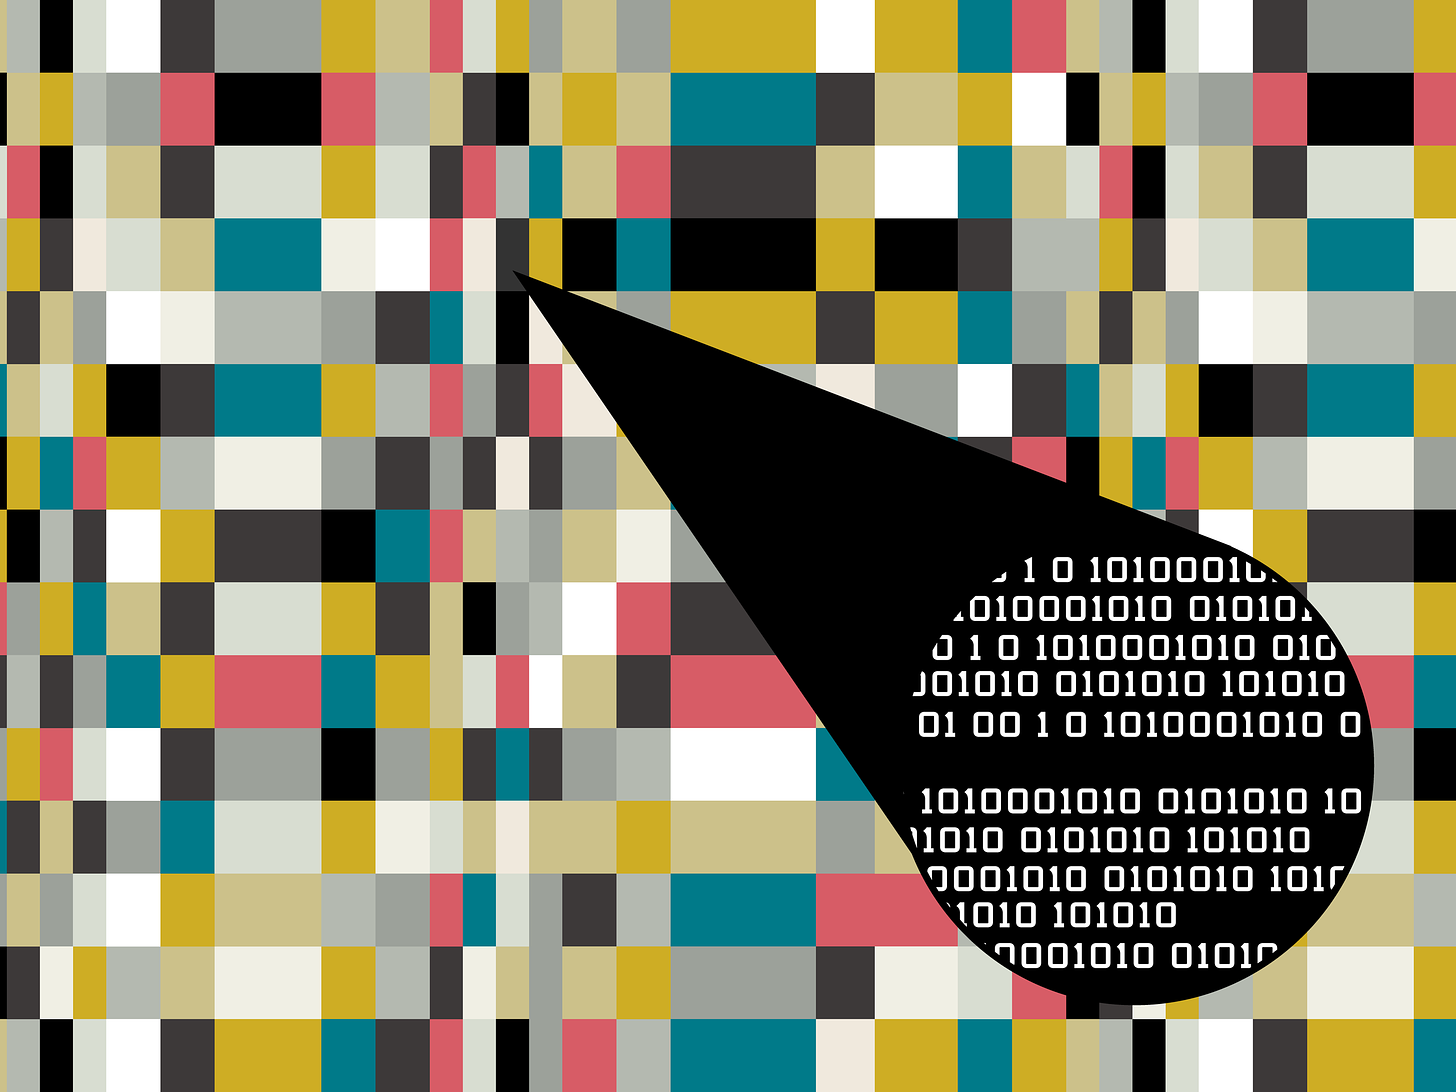 What Is Steganography? | WIRED